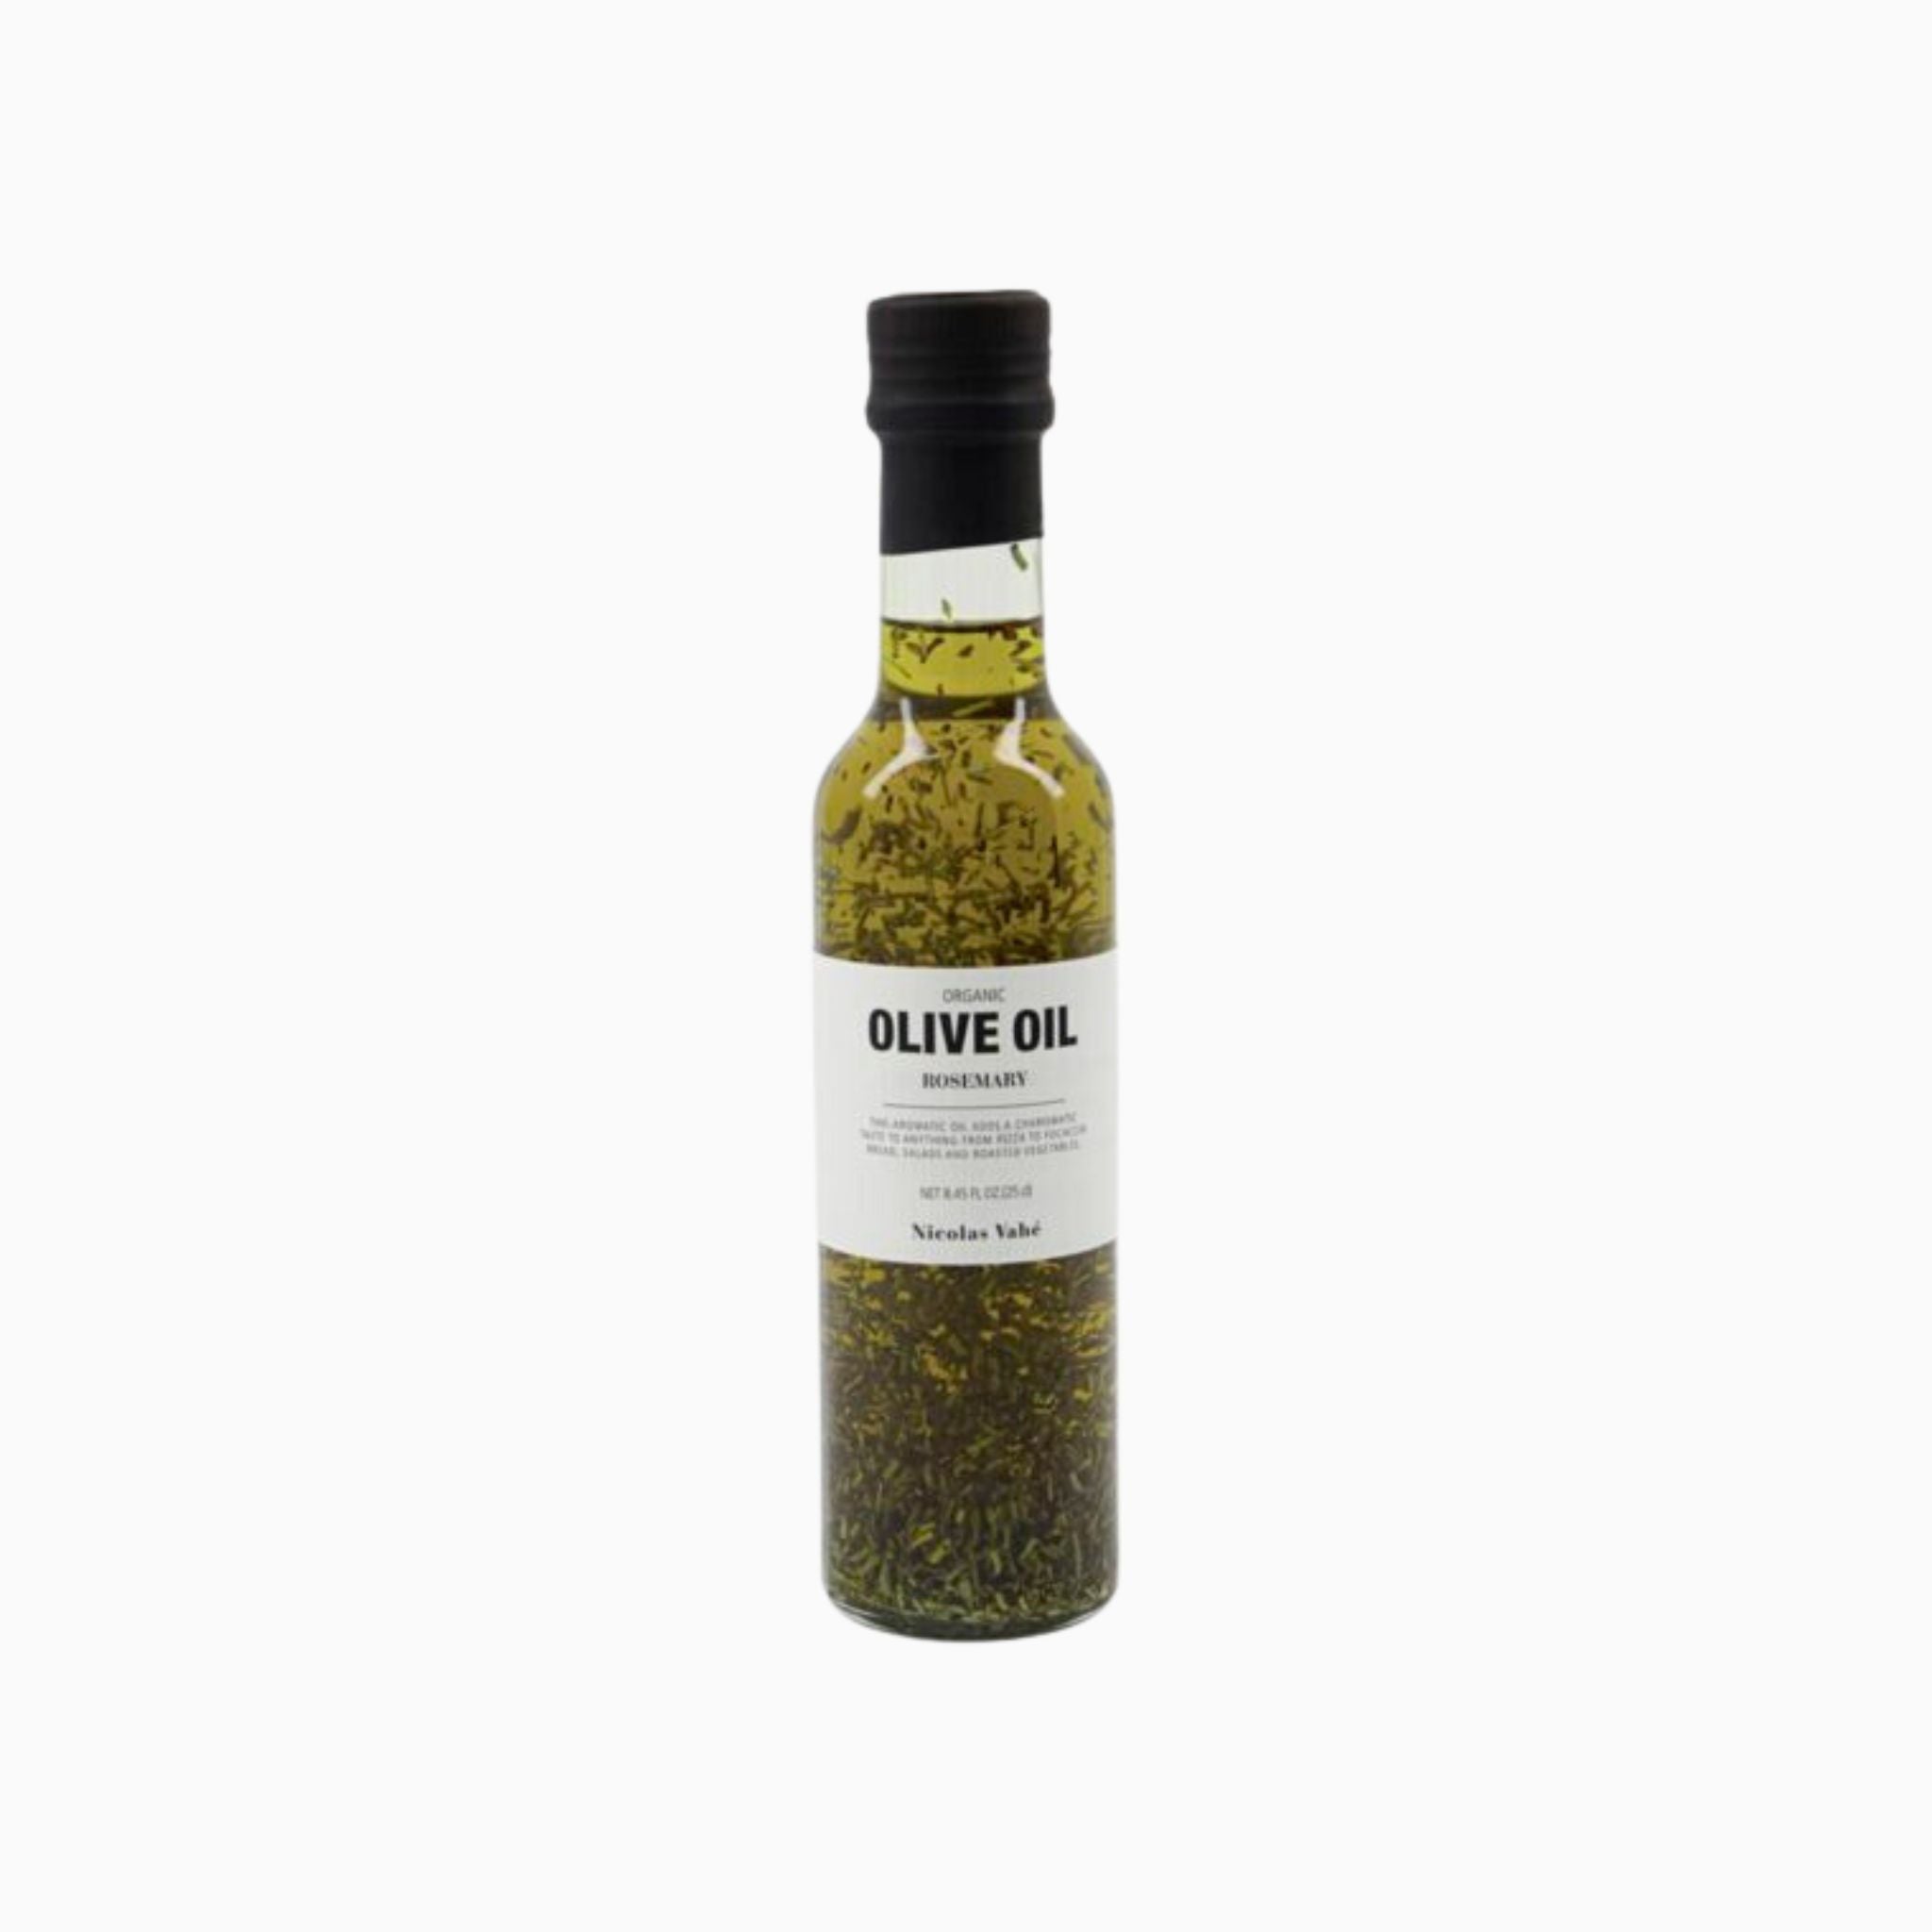 Simply Elevated - Try this 100% extra virgin olive oil with lemon to add a fresh edge to your cooking. The aromatic flavor brings out the best in a delicious salad. We recommend that you use this oil for fish and shellfish as well as dressings and marinades.